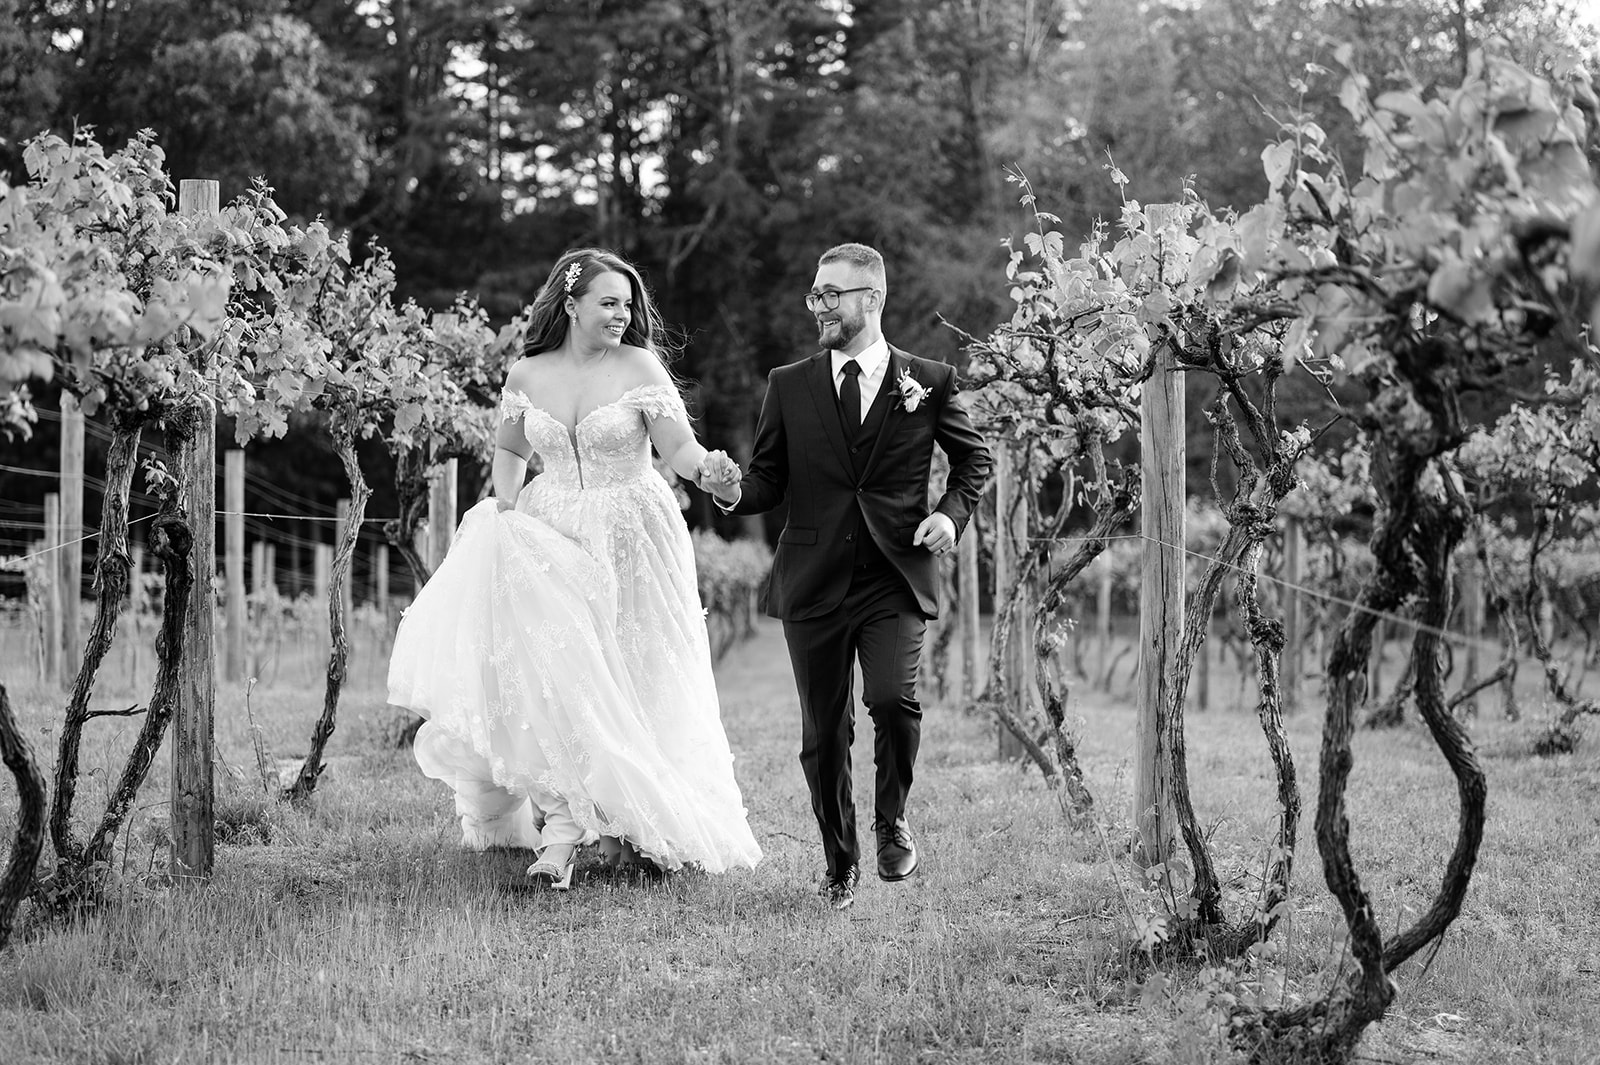 Bride and groom run through the vines